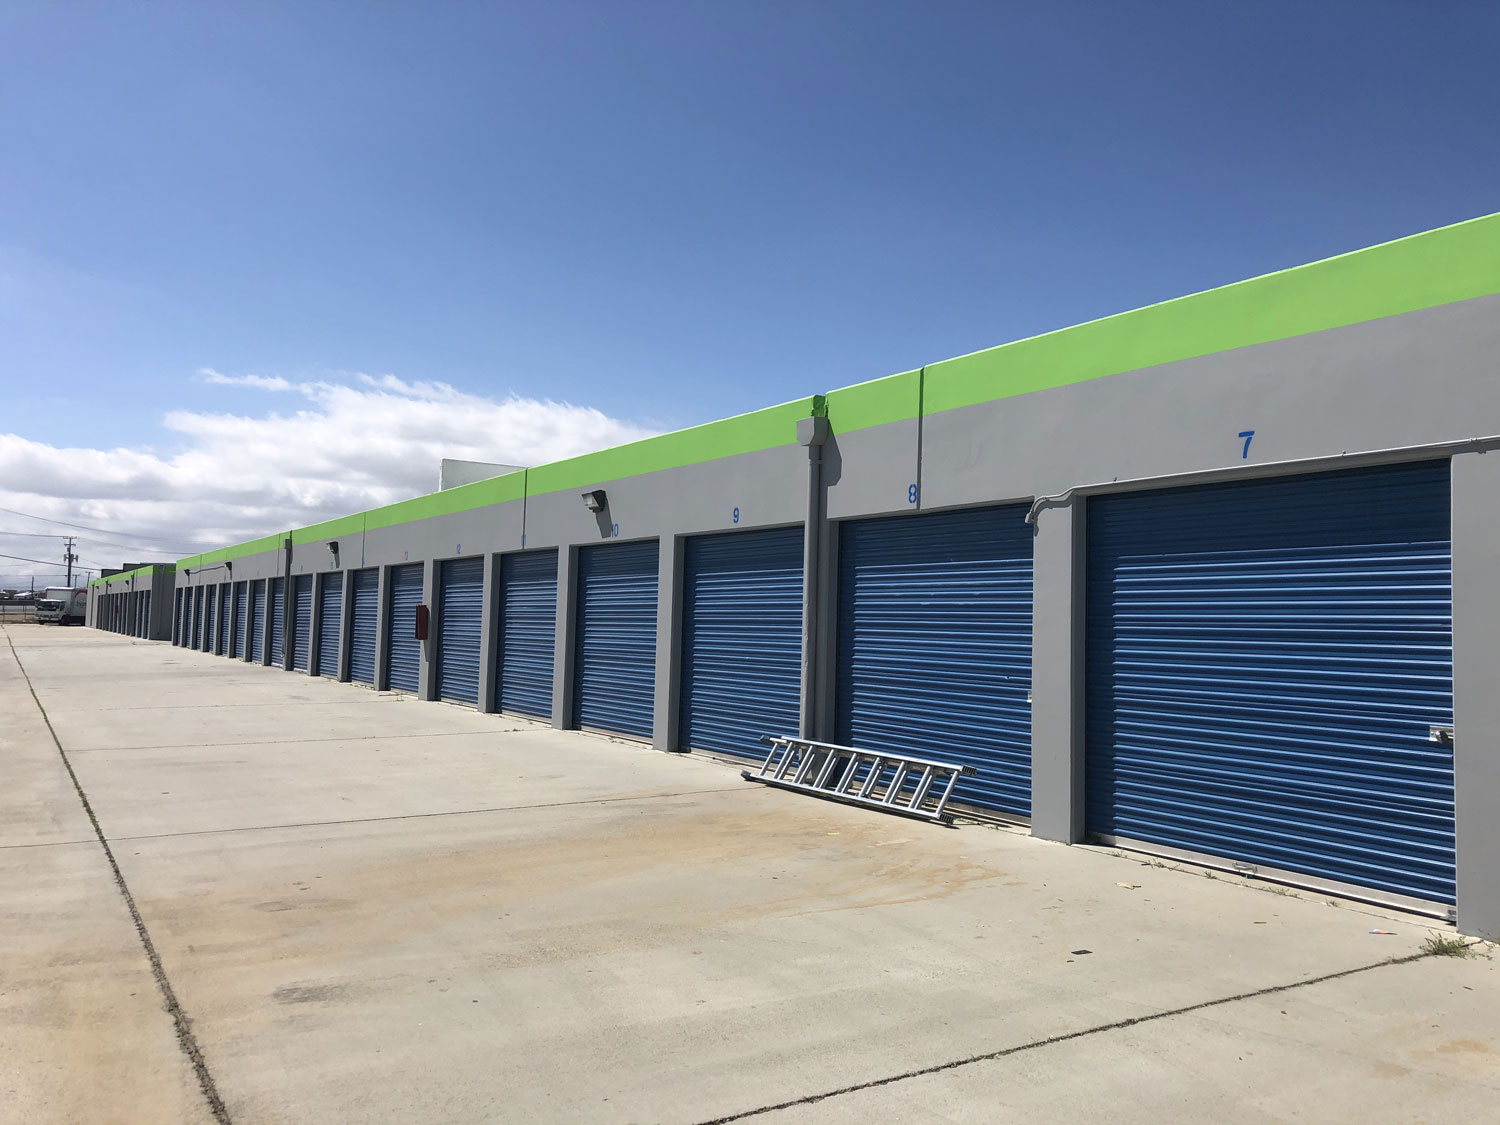 storage facility painting project